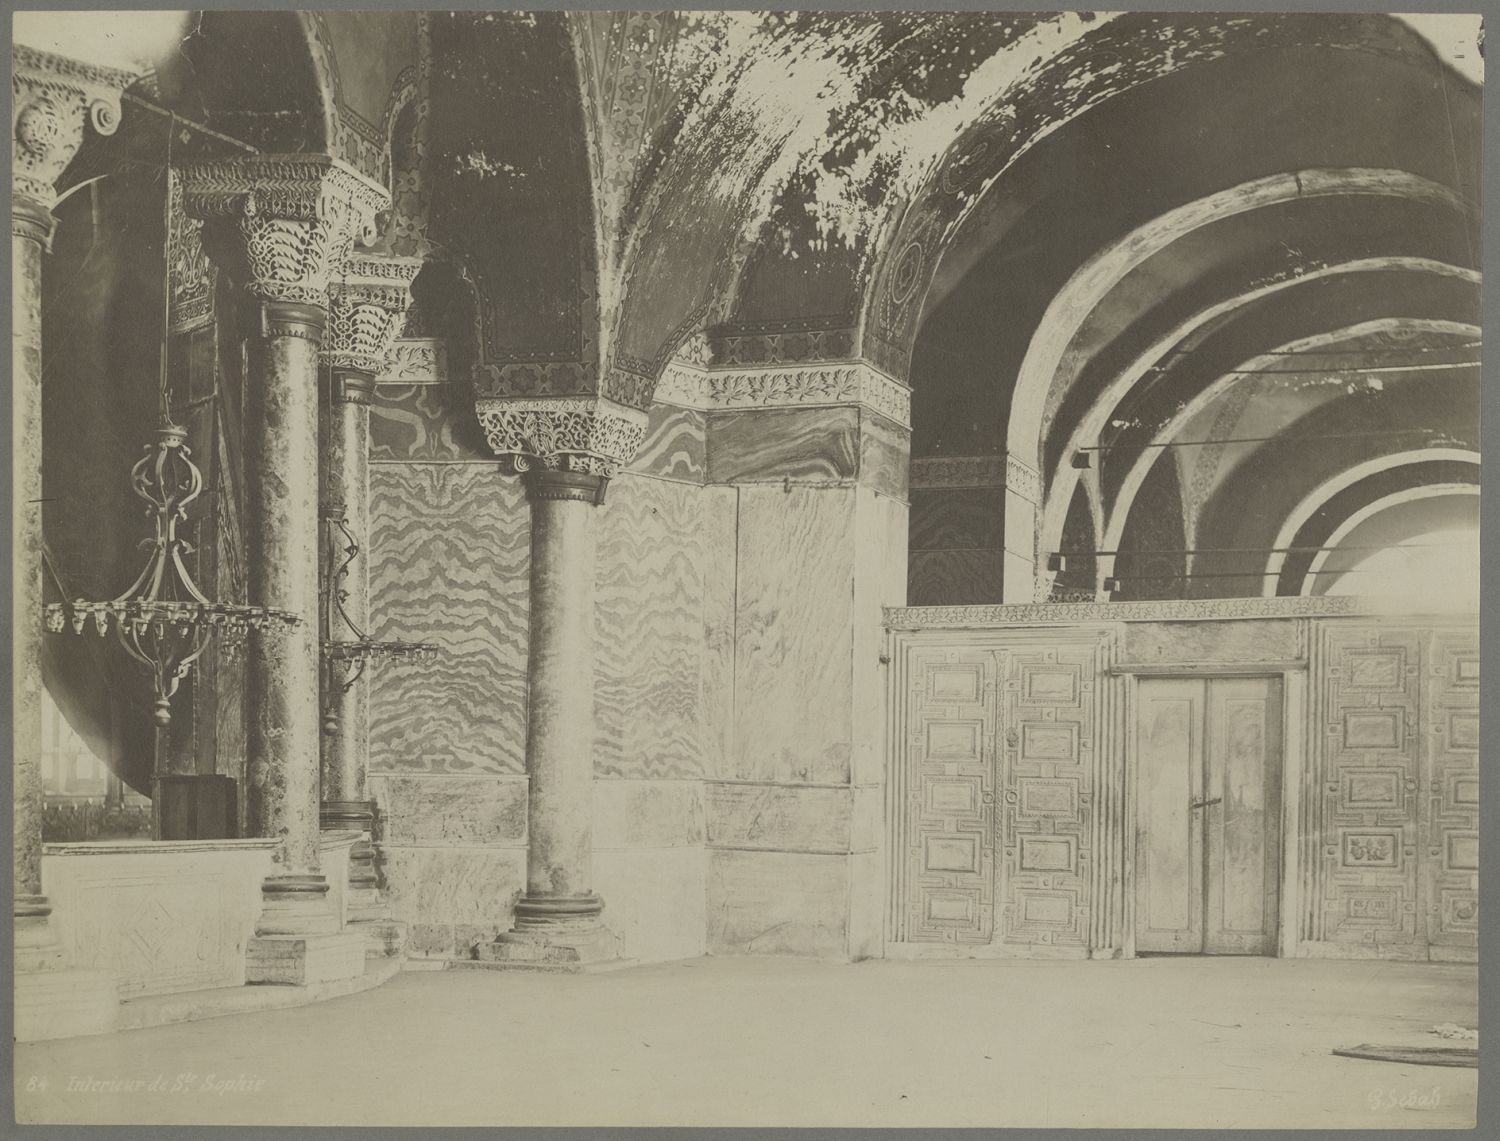 Upper galleries: view of marble doors and quarter-sawn marble decoration.